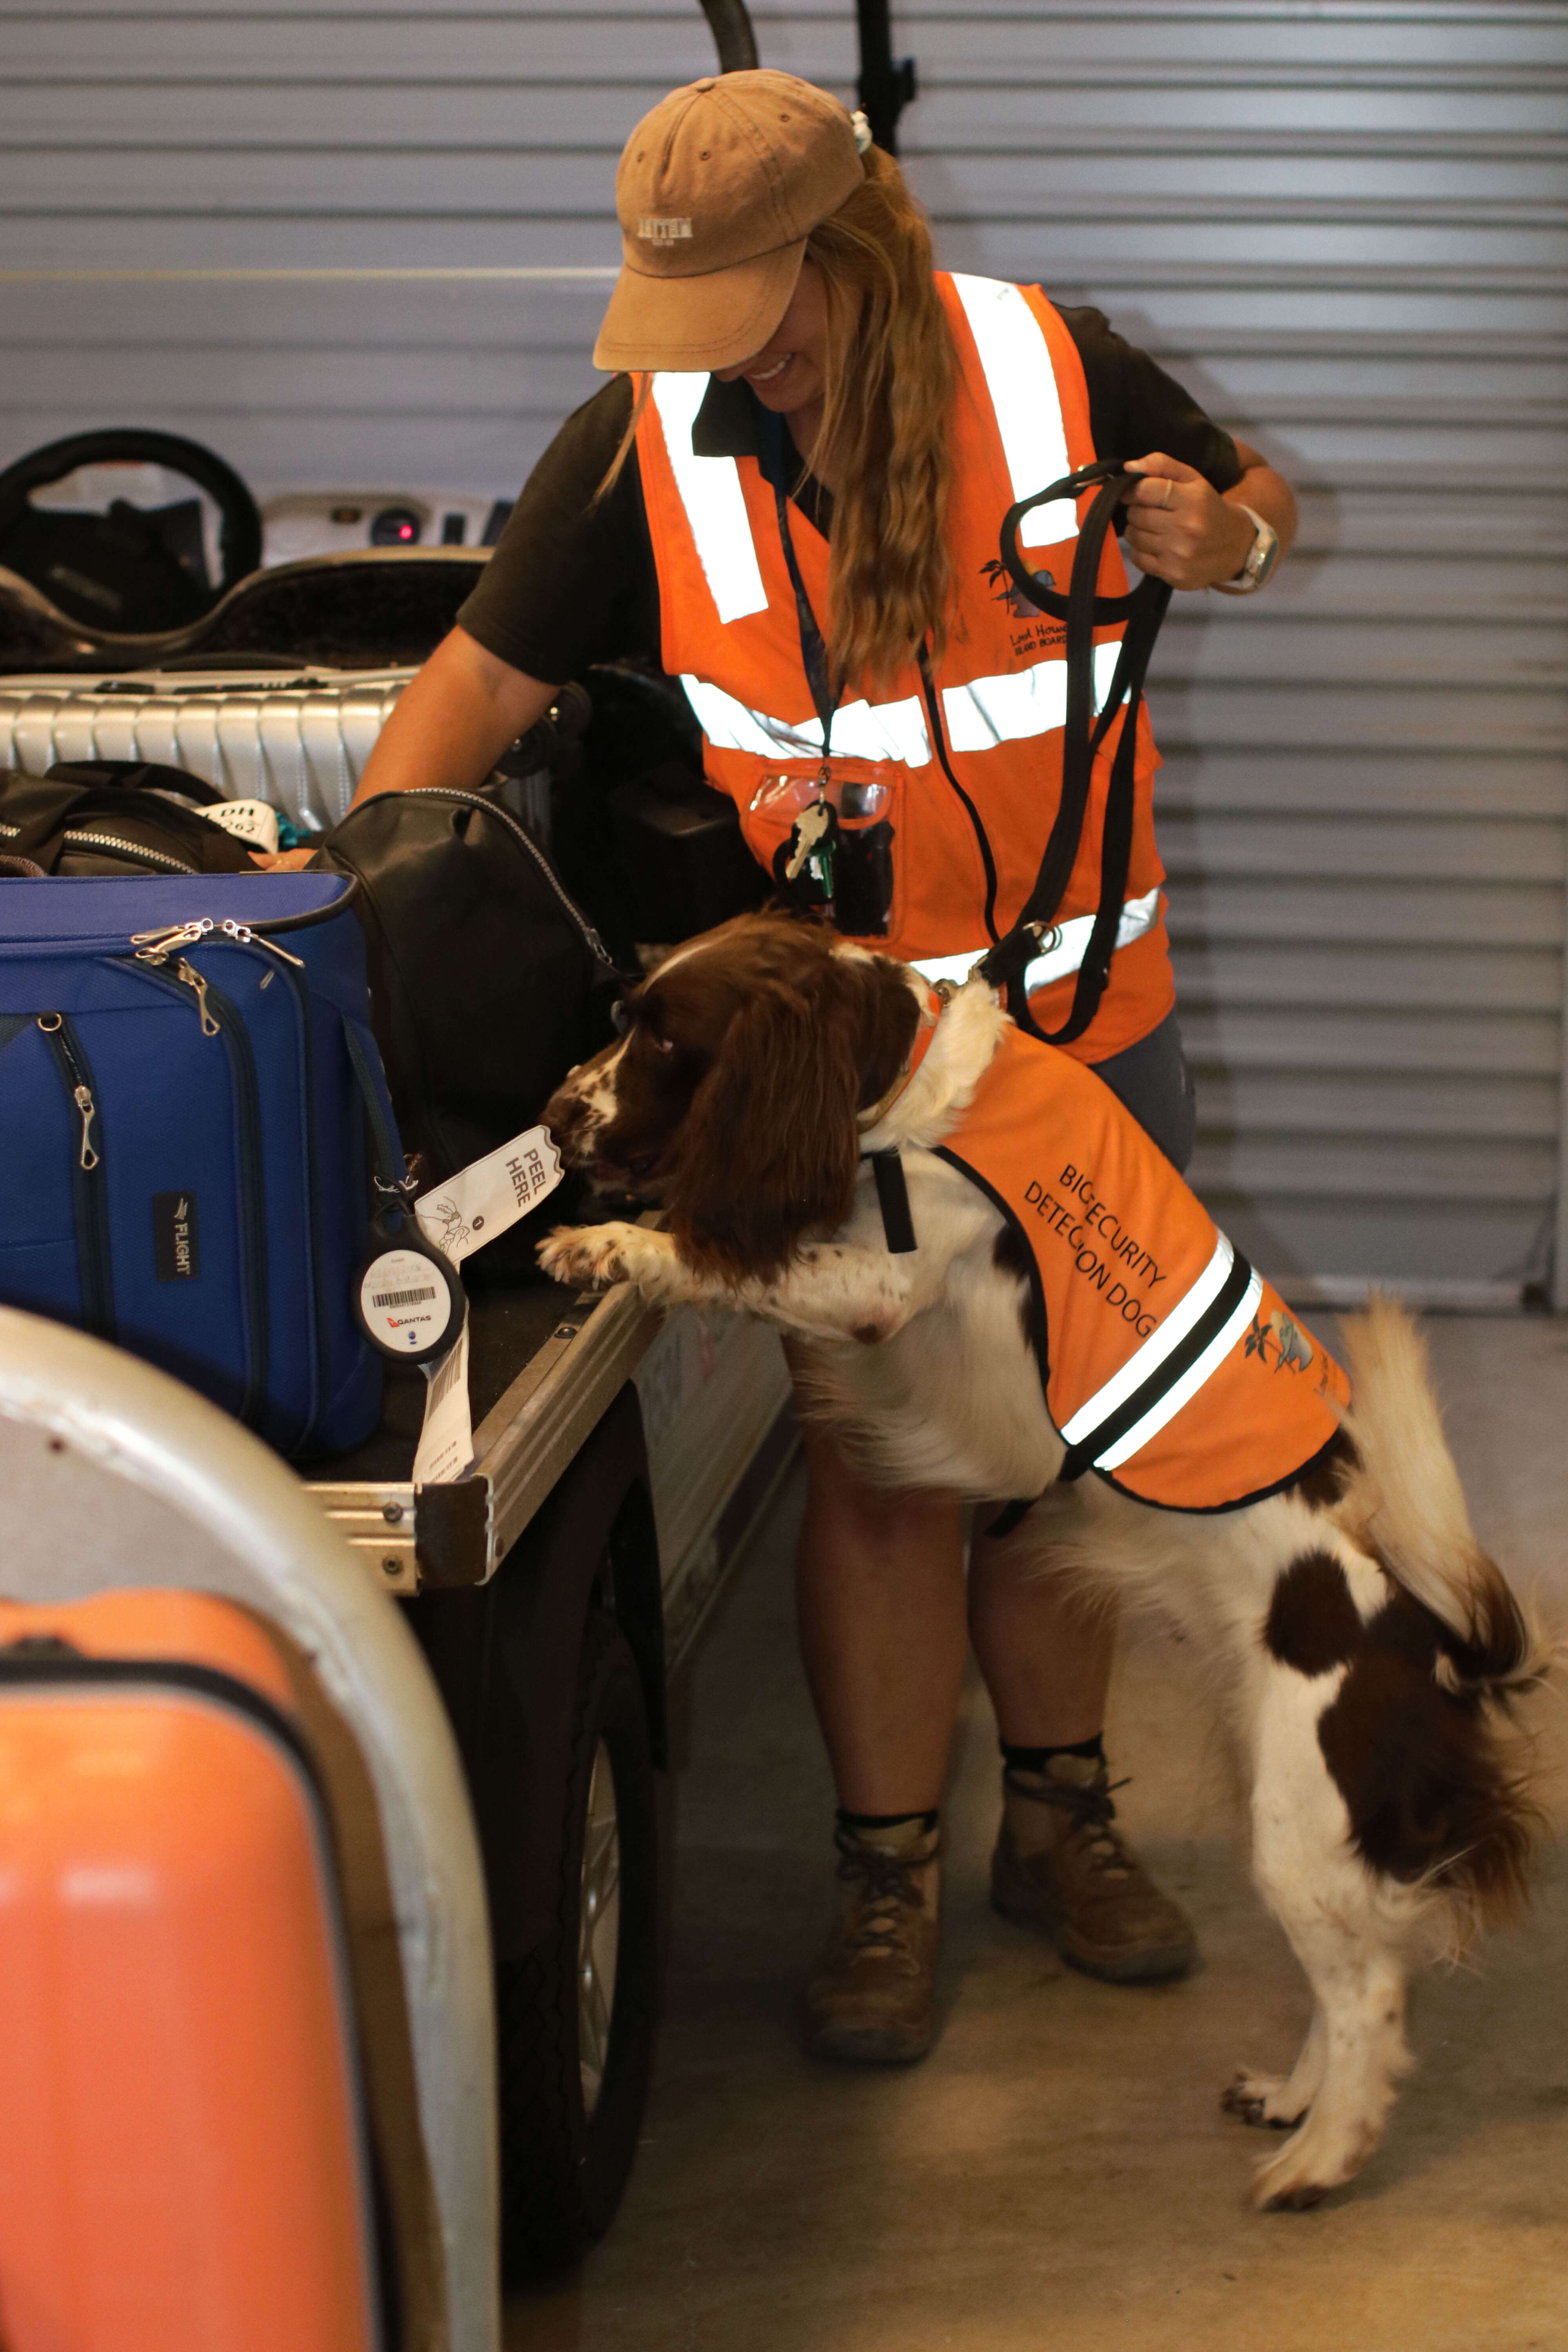 Detection dog sniffing luggage at airport